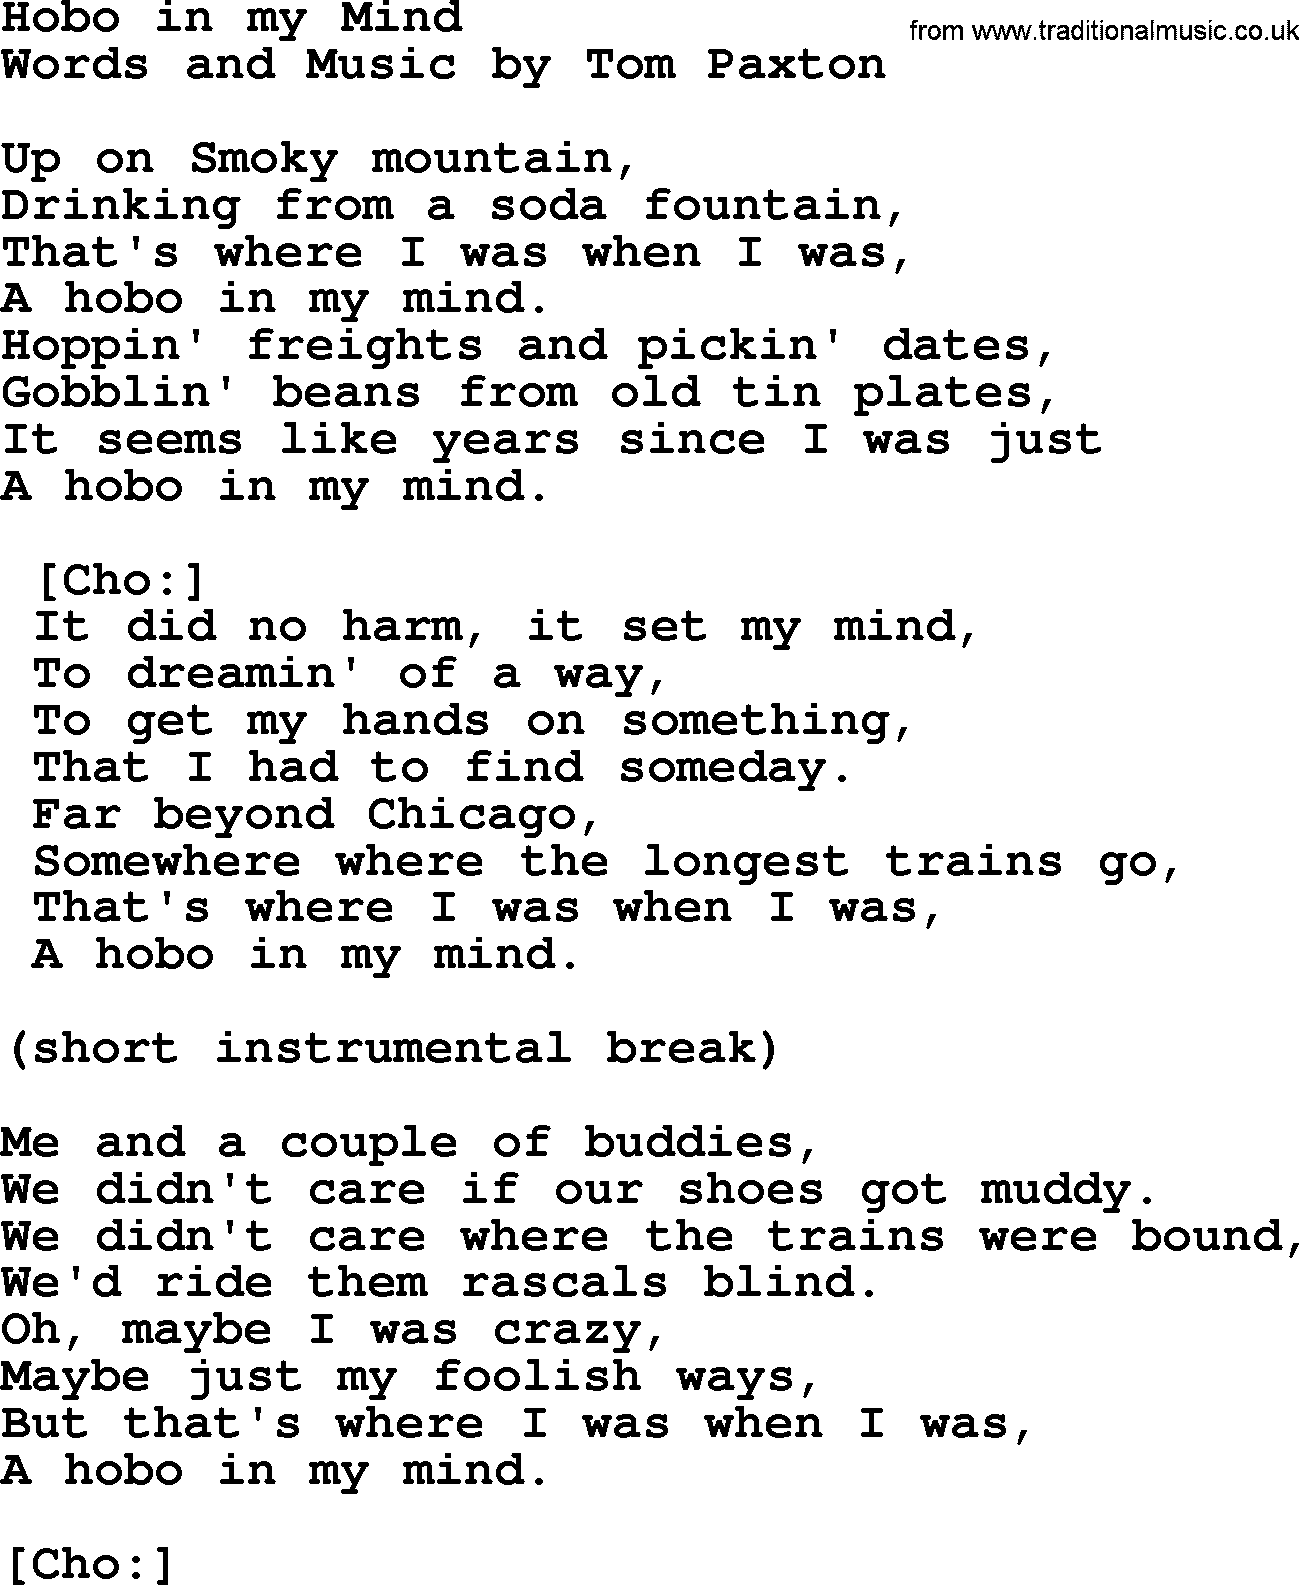 Tom Paxton song: Hobo In My Mind, lyrics